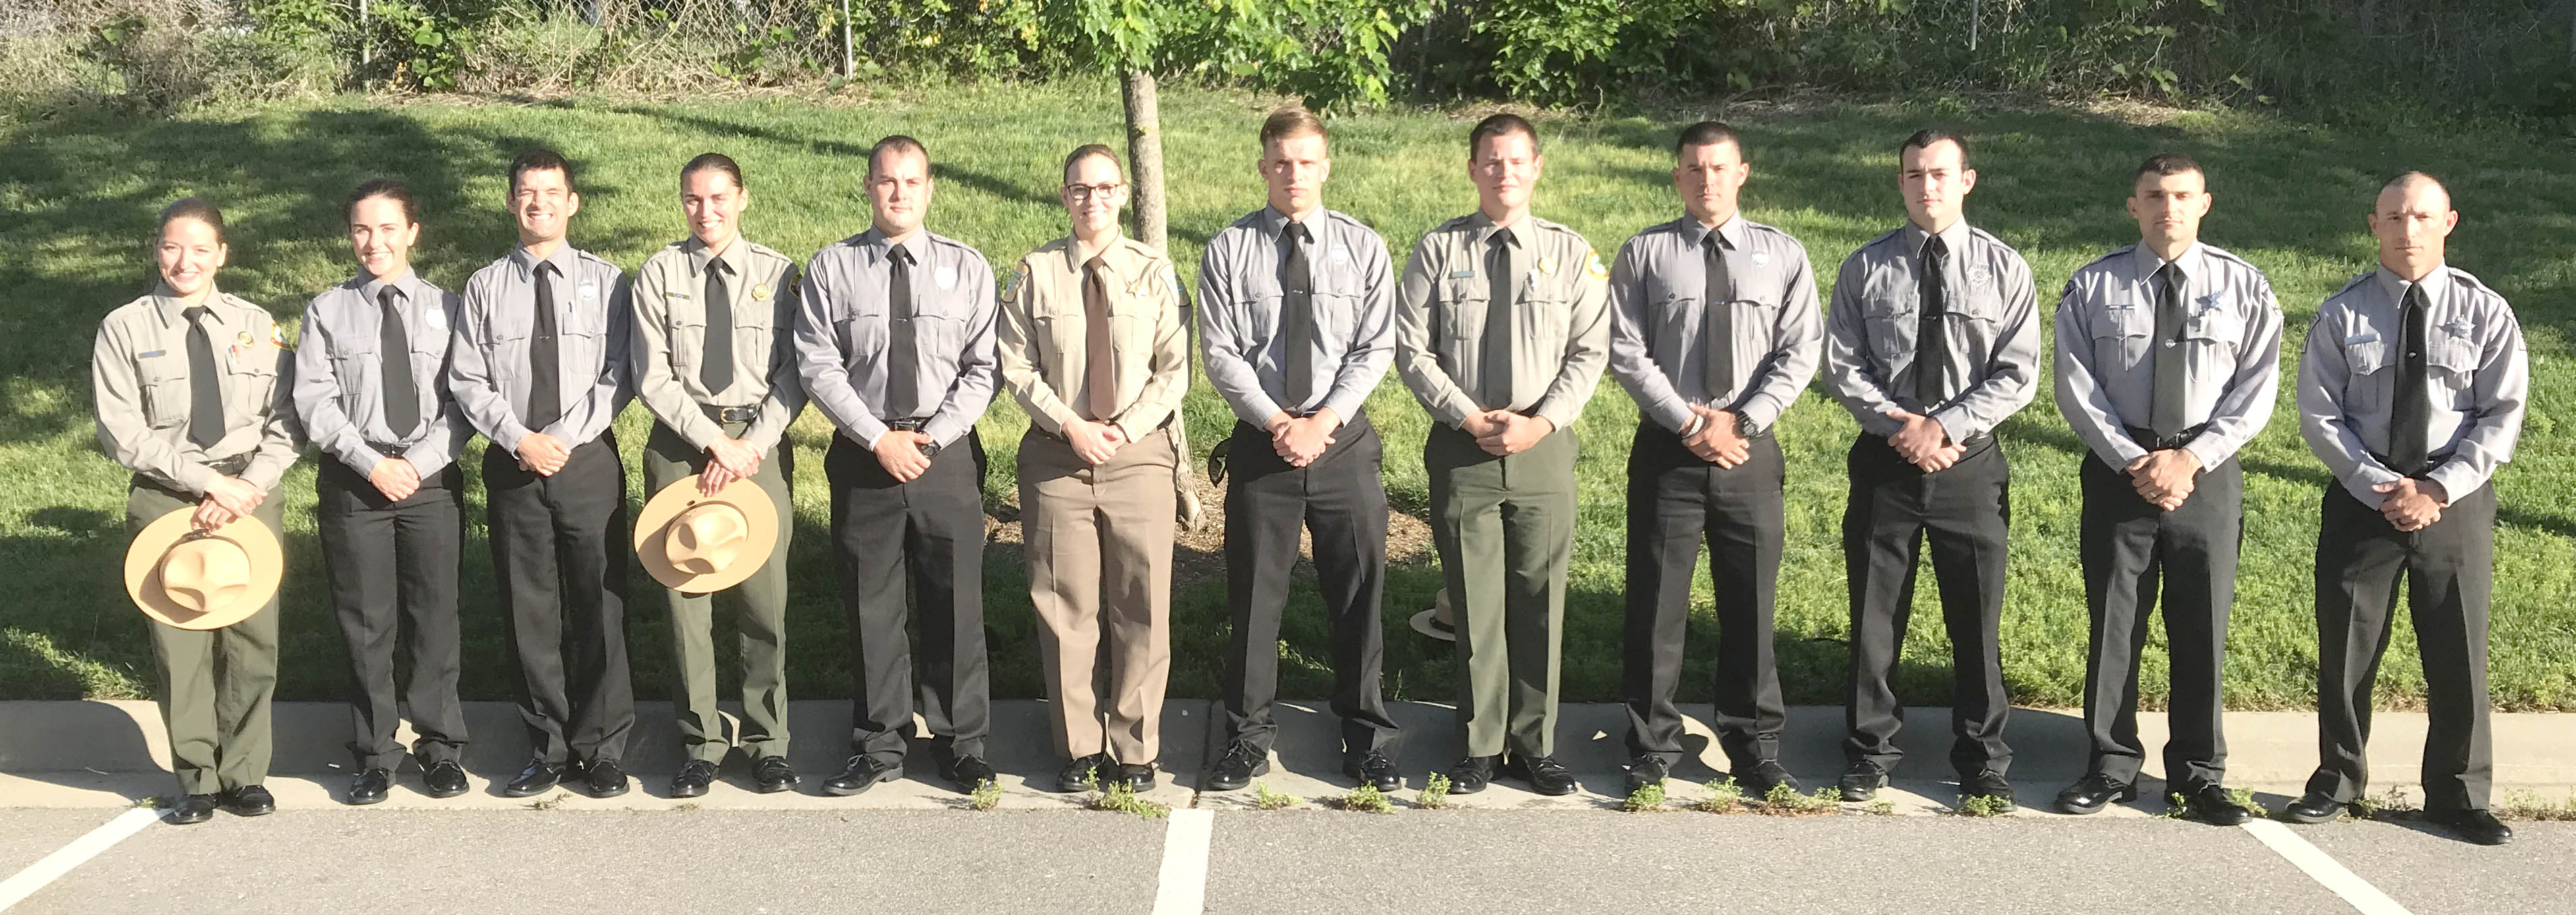 Click to enlarge,  Pictured are members of Central Carolina Community College's Basic Law Enforcement Training (BLET) graduating class -- Rachel Mumma, Kendra Hepner, John Beach, Emily Davies, Alan Zoller, Samantha Spears, Devin Smith, Jonathan Buie, Evan Cannaday, Jesse Moore, Jonathan Cox, and David Nixon. For more information about the college's BLET program, visit www.cccc.edu/blet or contact Robert Powell at rpowell@cccc.edu or 919-777-7774. 